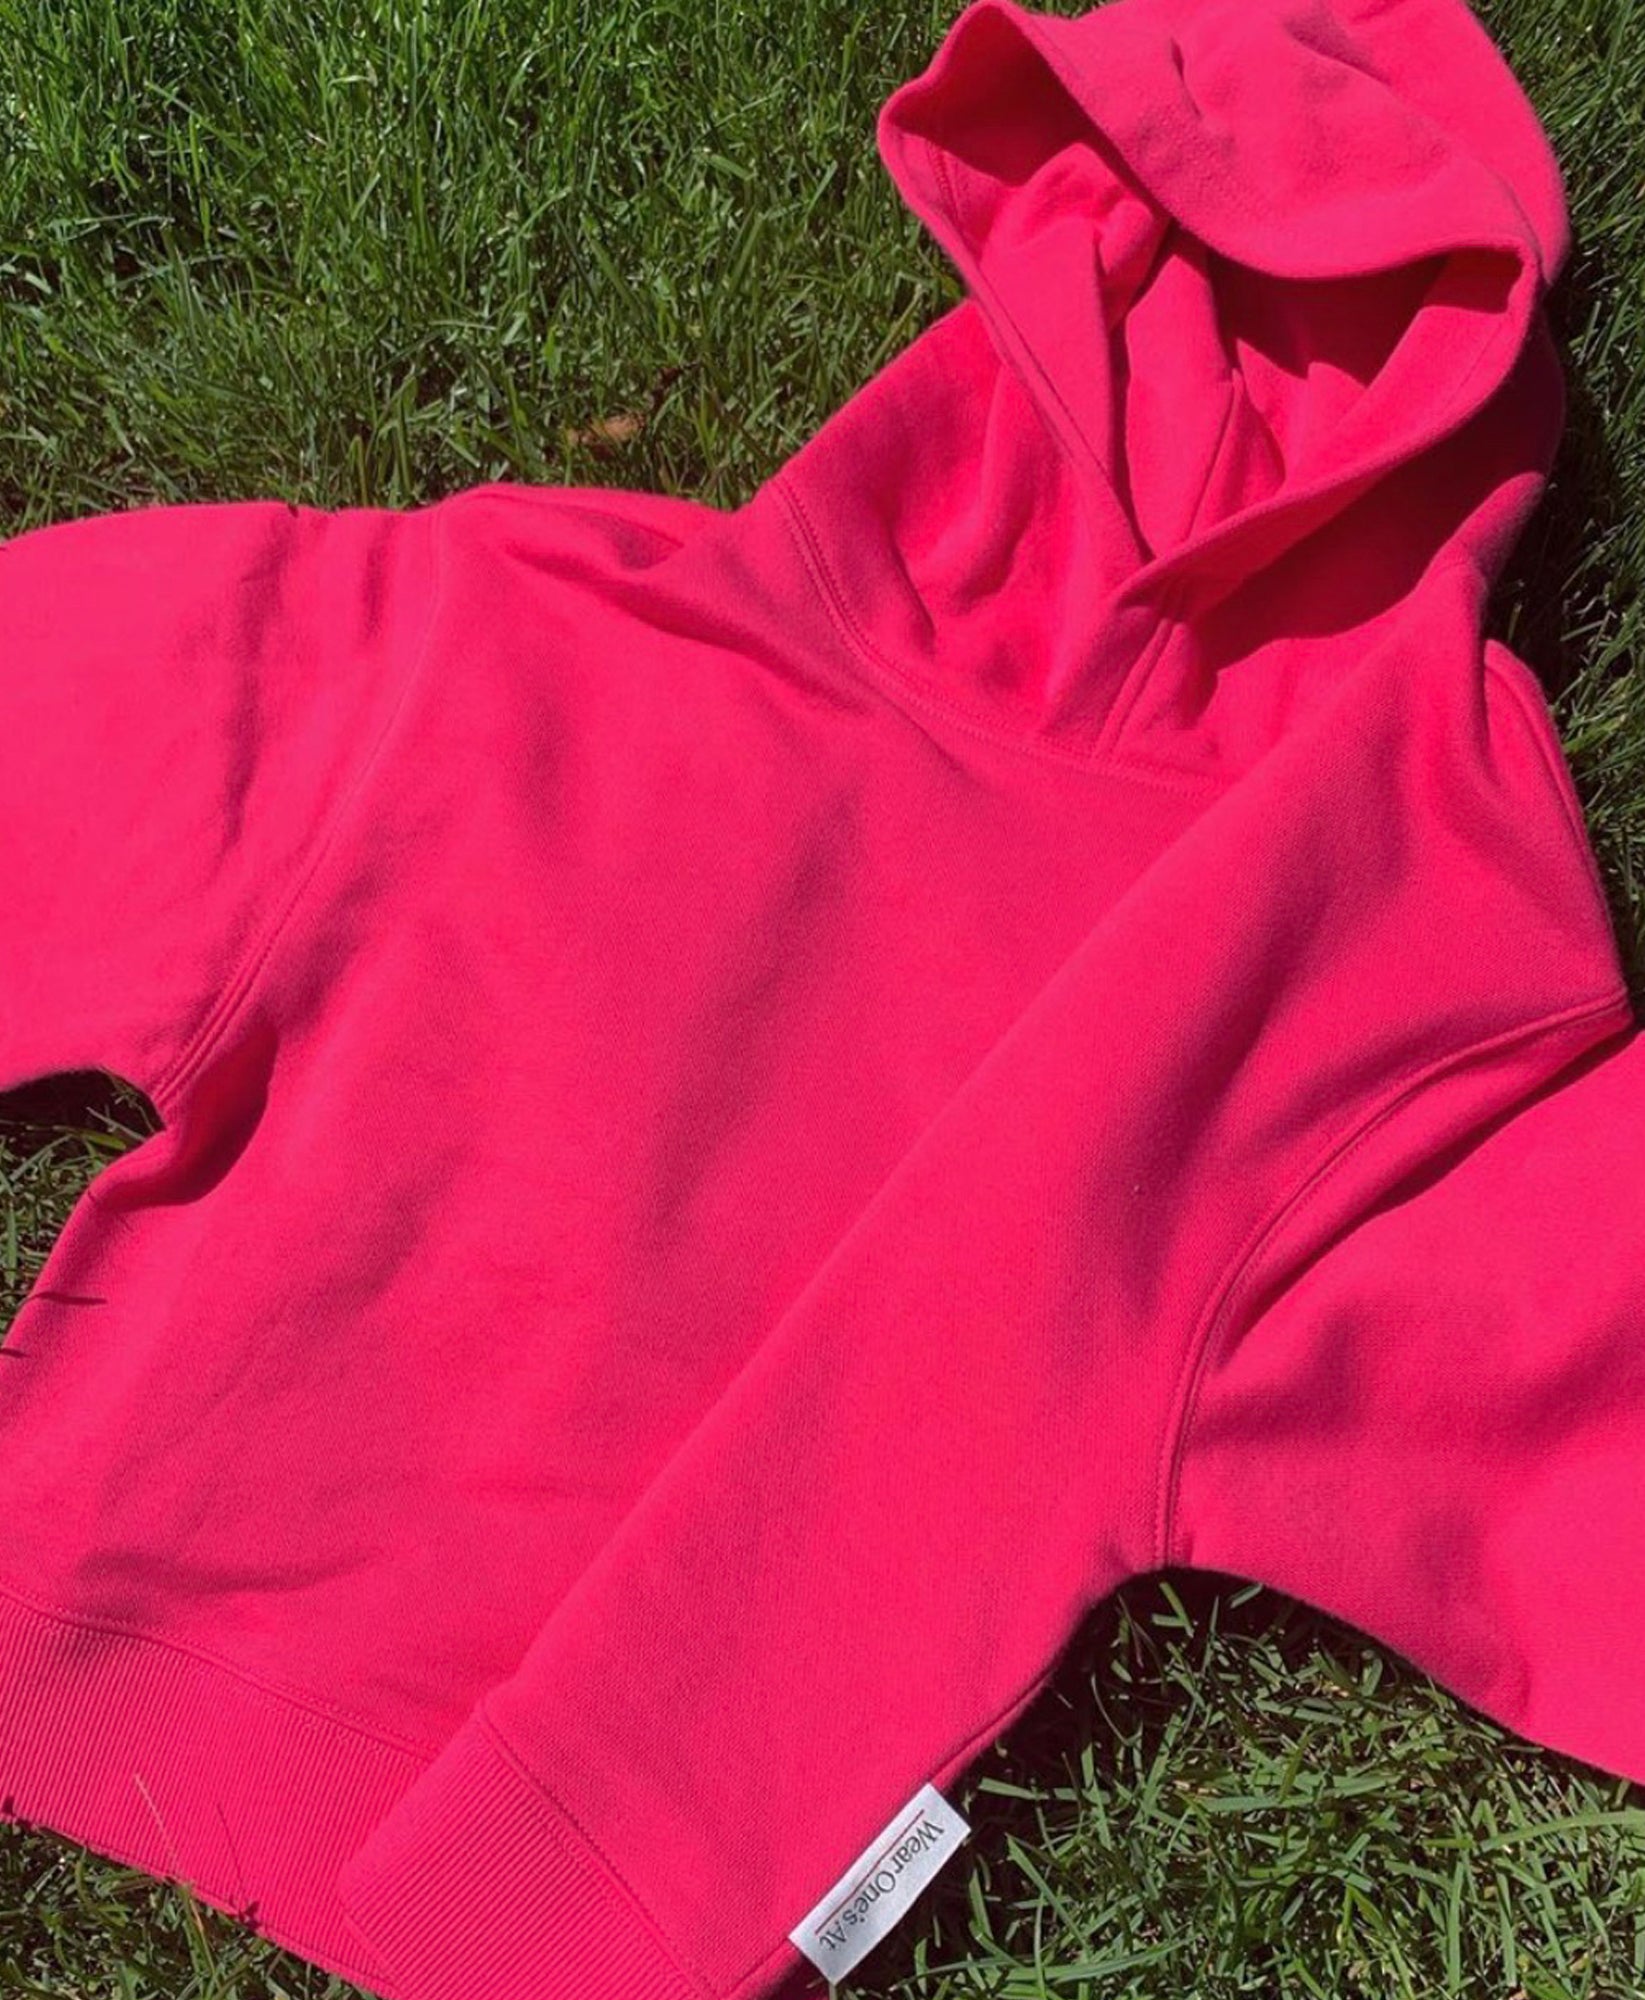 Wear One's At French Terry Cropped Hoodie in Watermelon Laying on Grass Front View